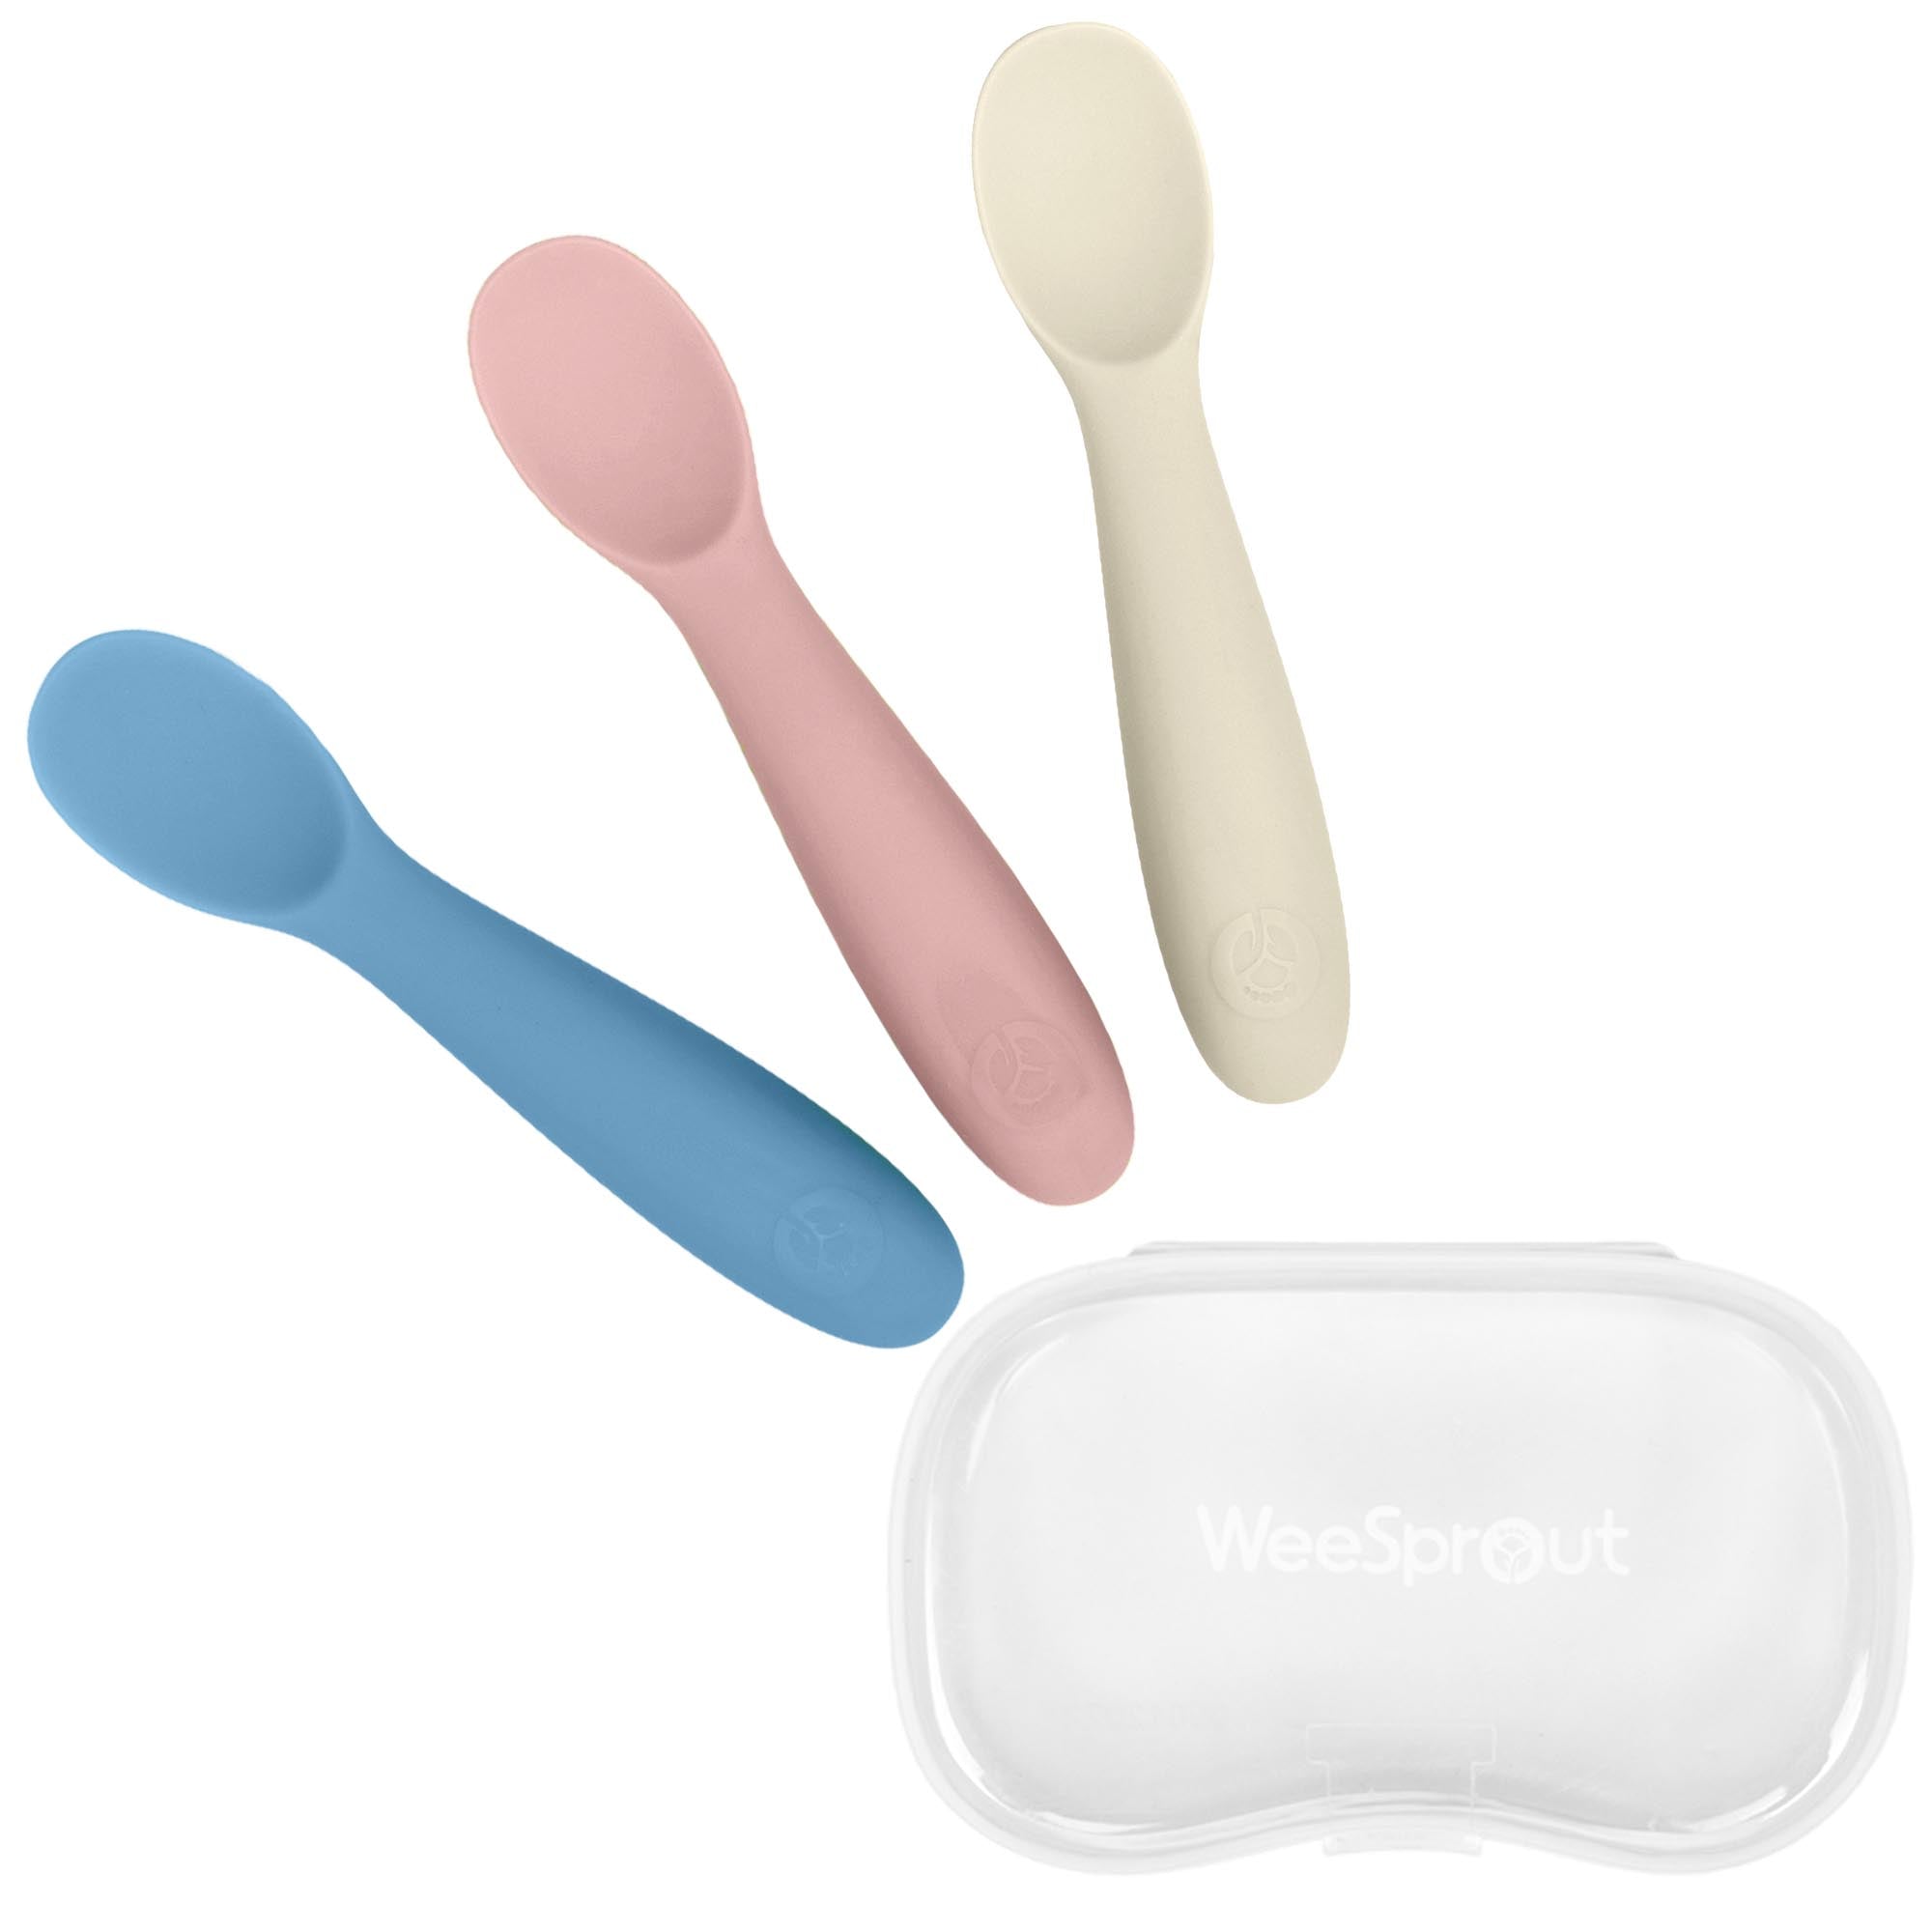 WeeSprout Toddler Utensils, 3 Forks & 3 Spoons, 18/8 Stainless Steel & Food Grade Silicone, Blue, Pink, Off-White